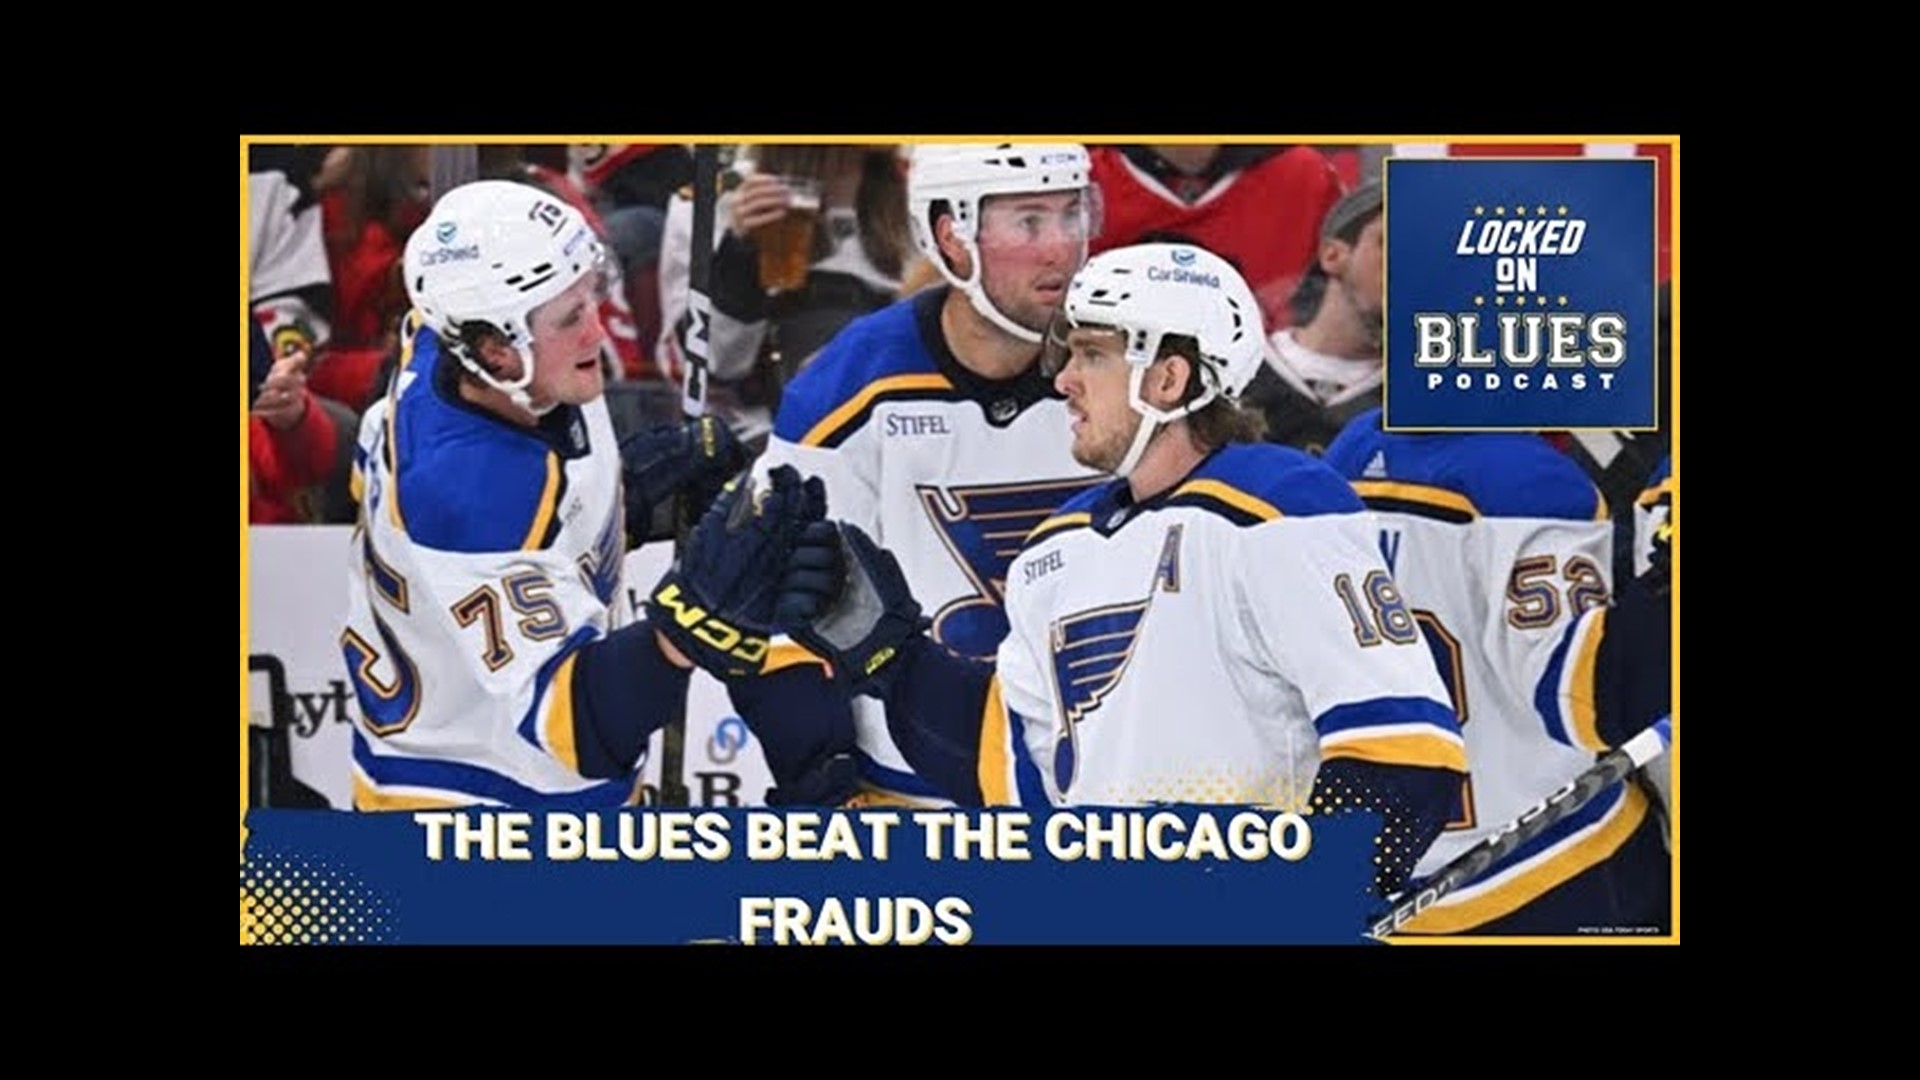 How Much Does It Cost to Attend a St. Louis Blues Game?